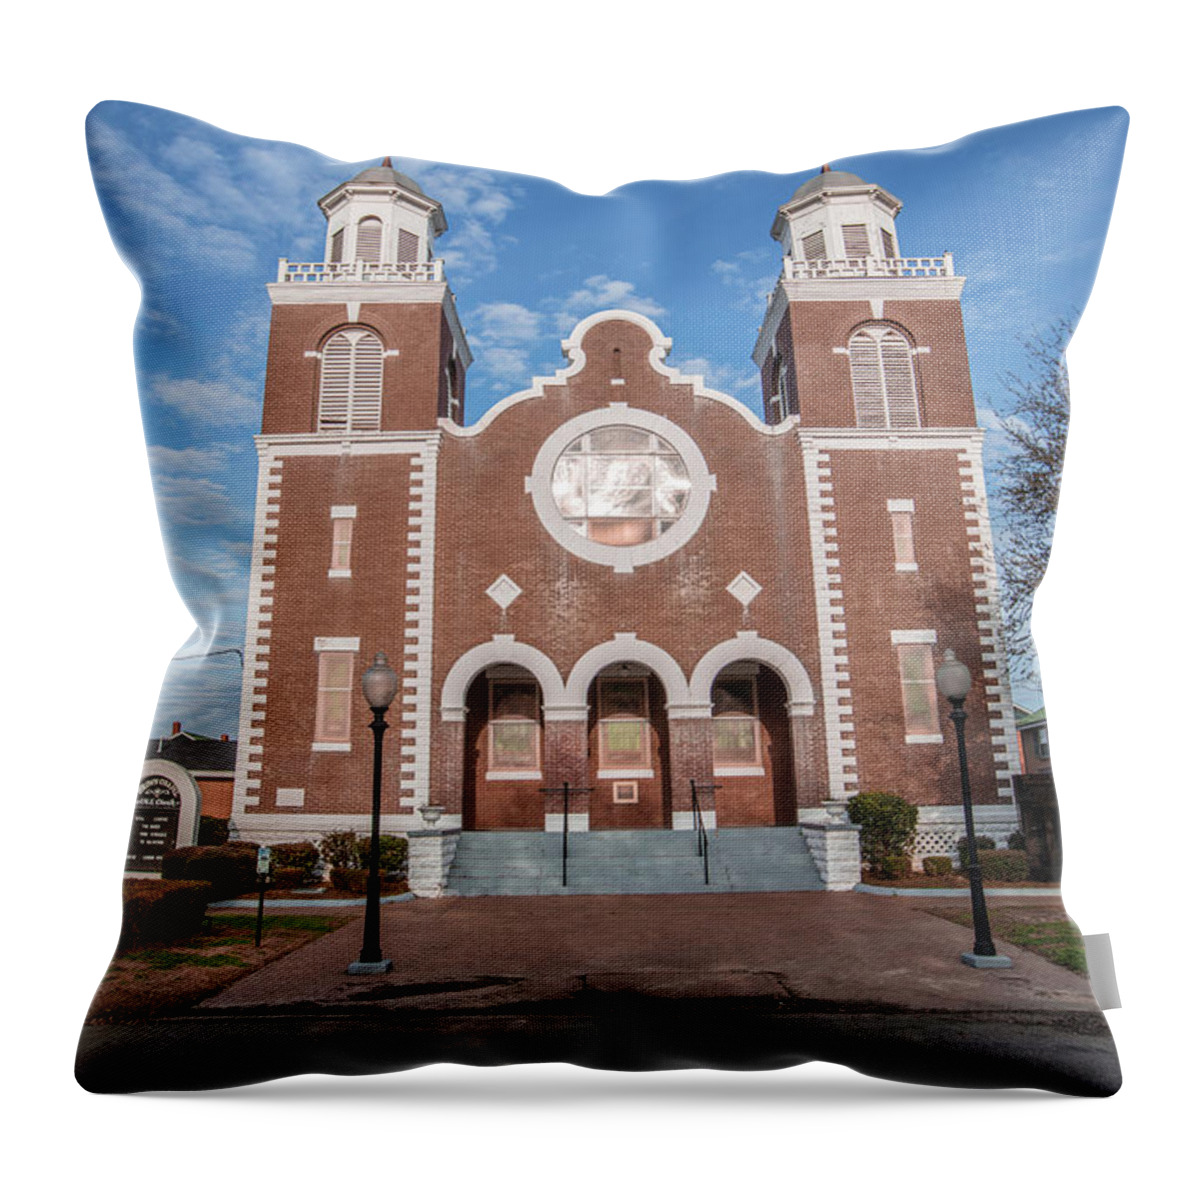 Cival Rights Movement Throw Pillow featuring the photograph Brown Chapel African Methodist Episcopal Church Selma Alabama by John McGraw